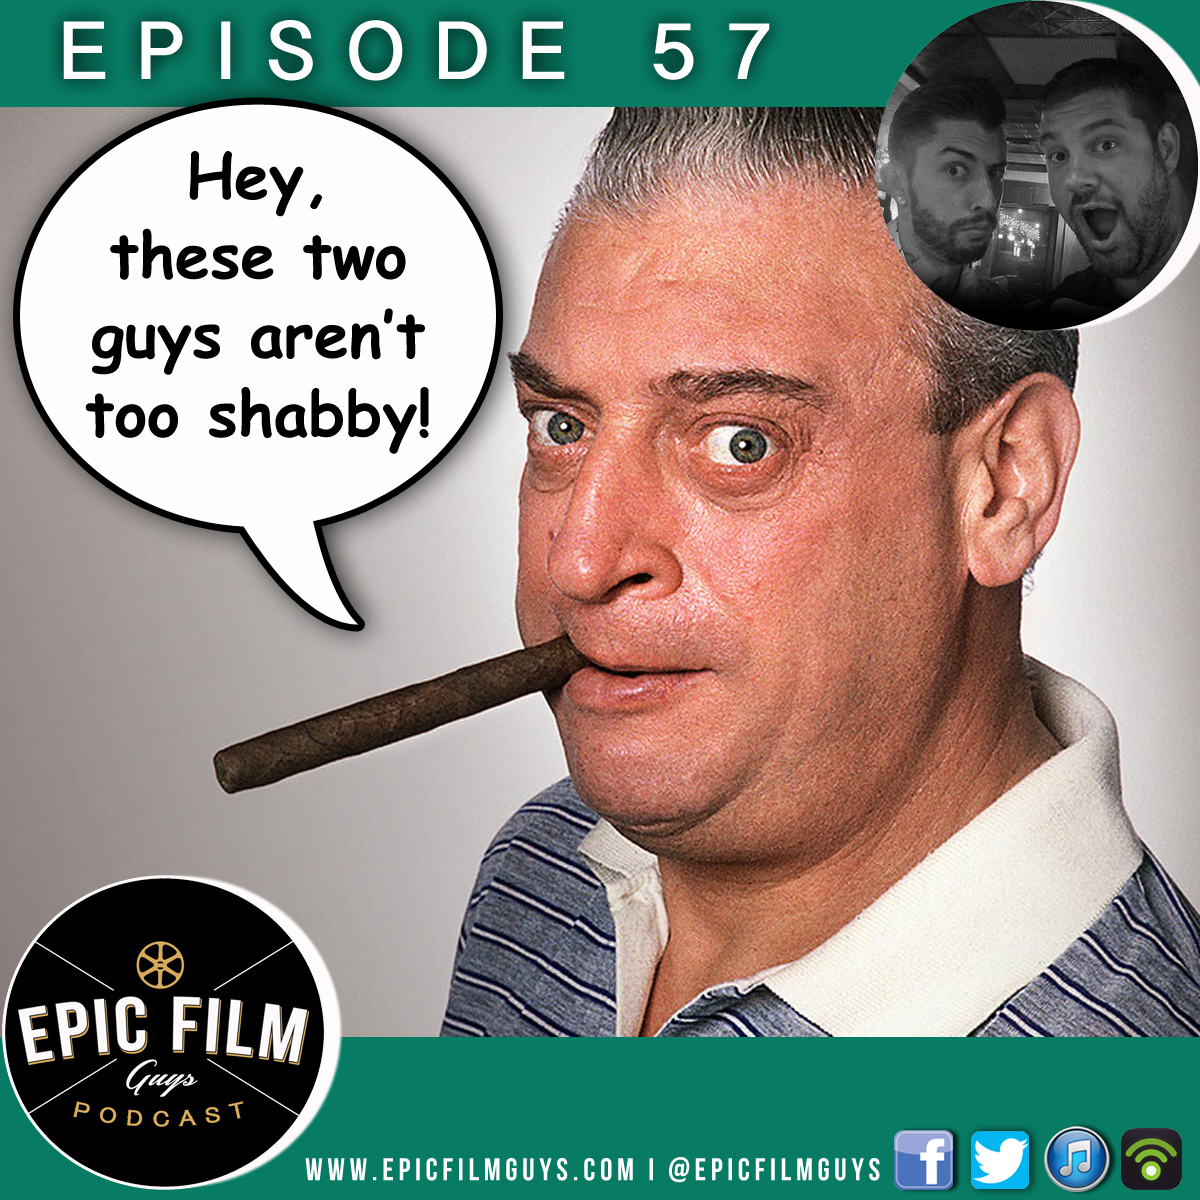 Episode 057 - Epic Film Guys Unscripted!